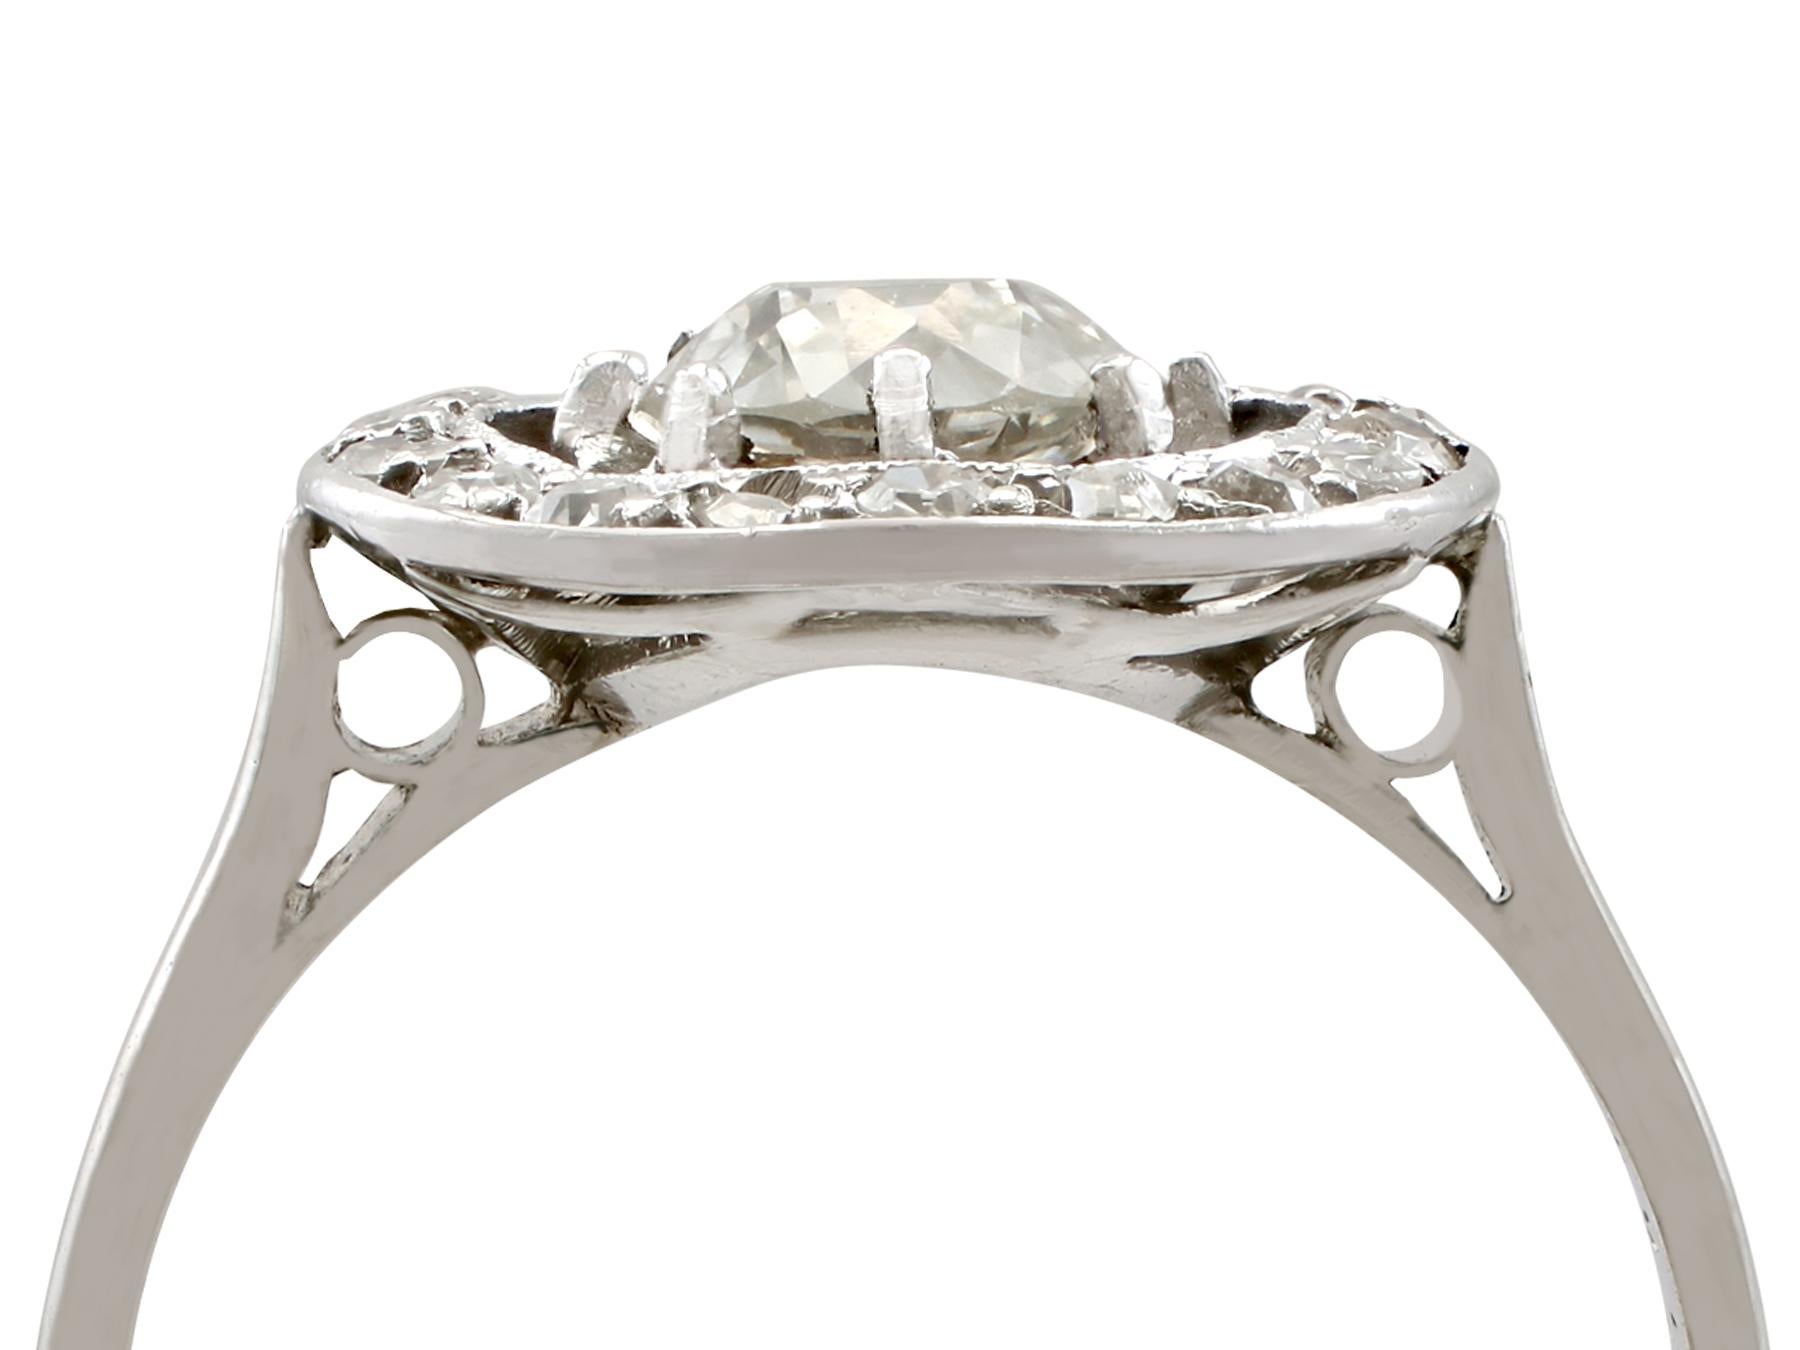 An impressive antique French 1920's 1.30 carat diamond and platinum cluster style dress ring; part of our diverse antique jewellery and estate jewelry collections.

This fine and impressive diamond cluster ring has been crafted in platinum.

The